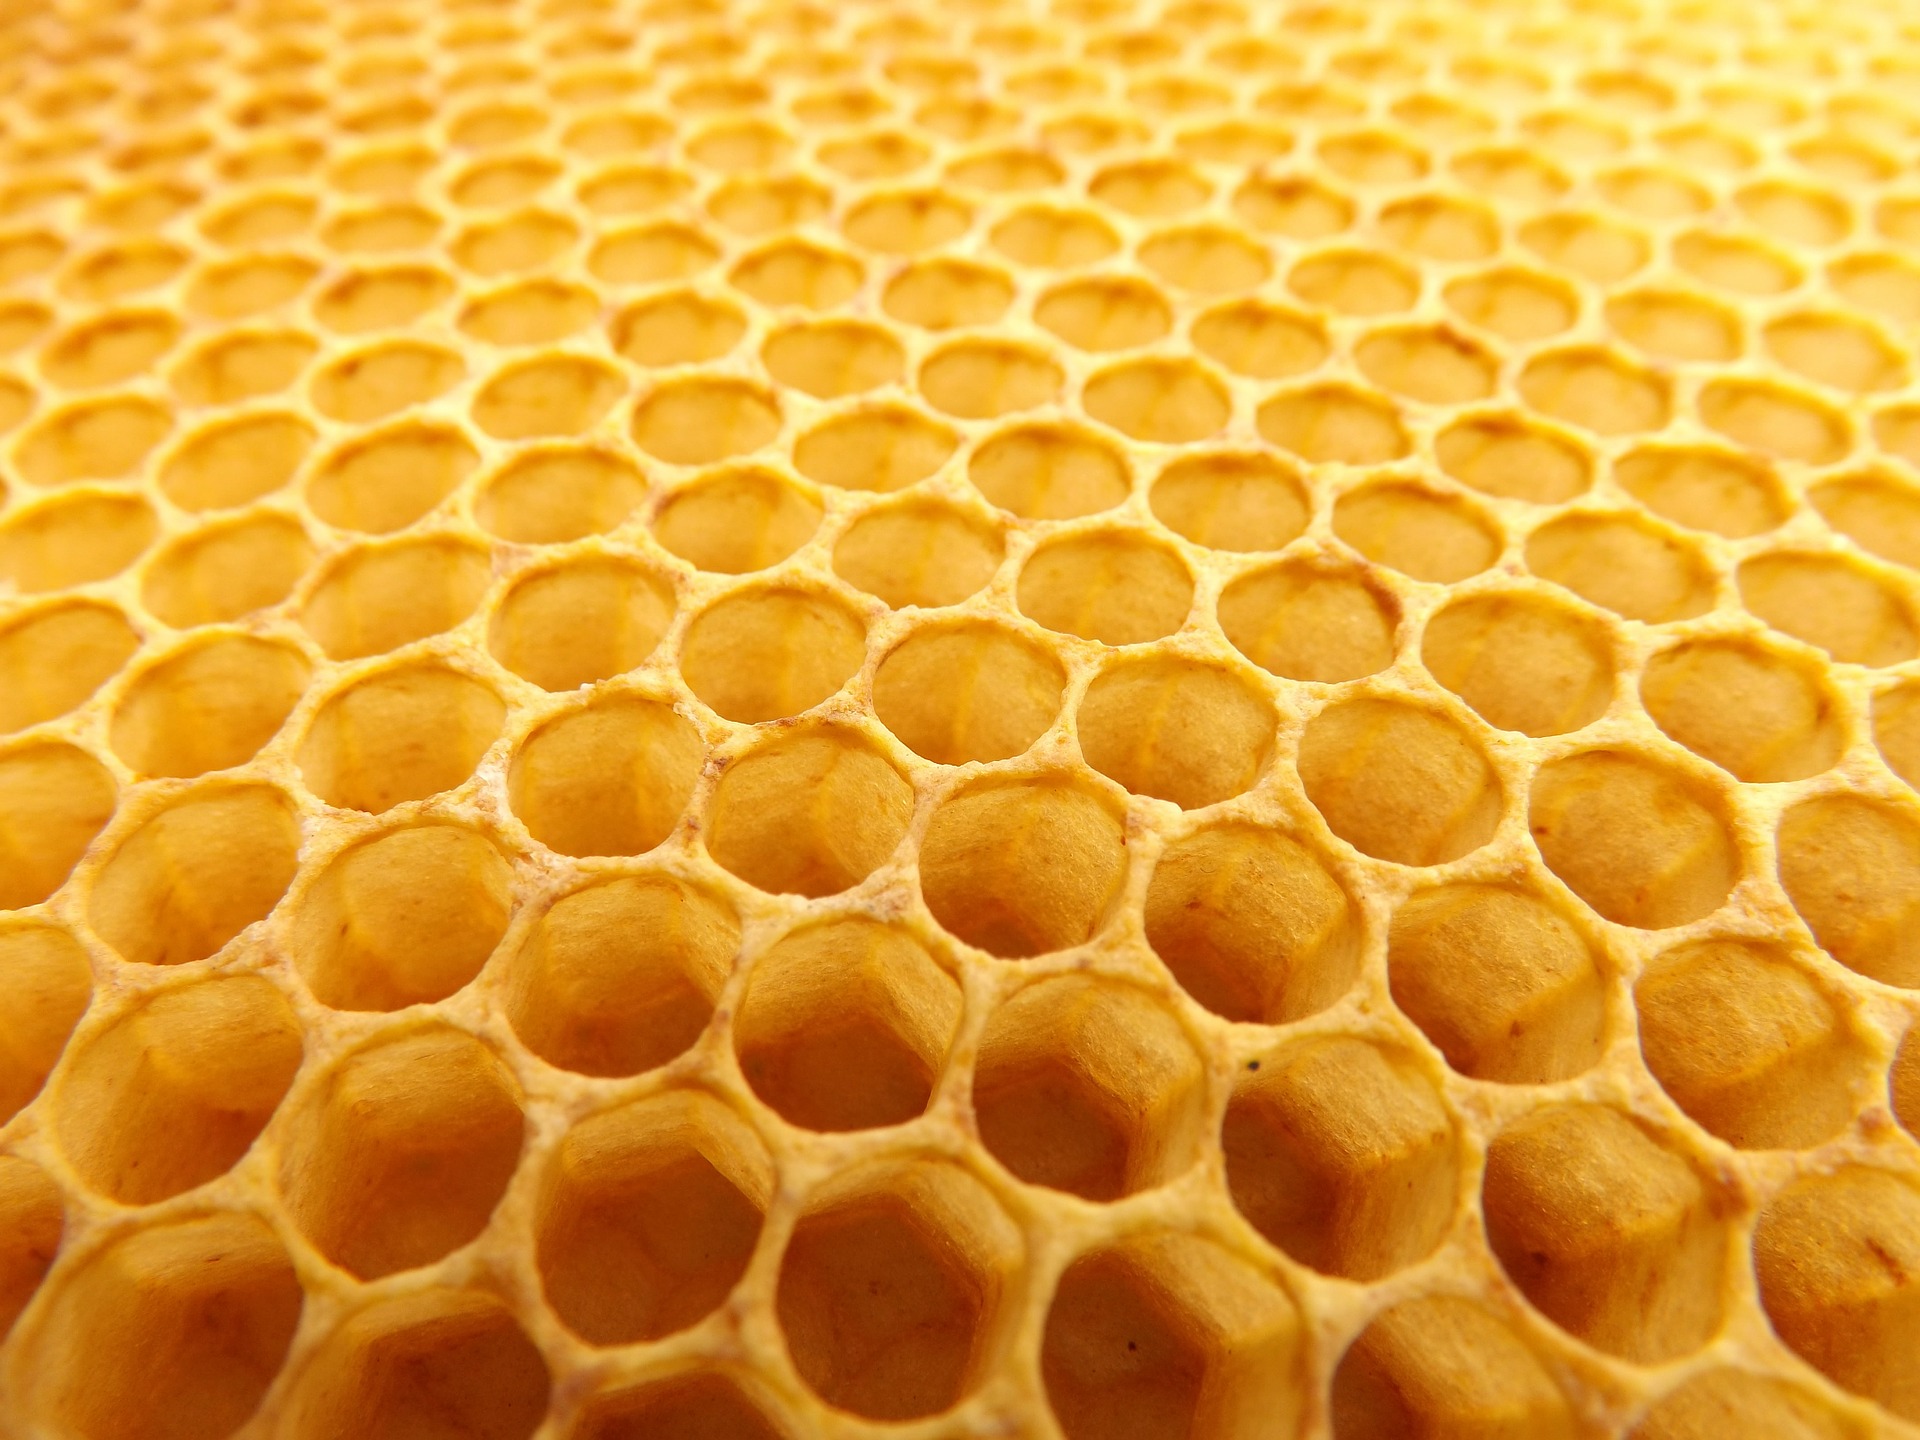 Honeycomb's repetitive patterns cause mental disorders like generalized anxiety disorder and fear of holes